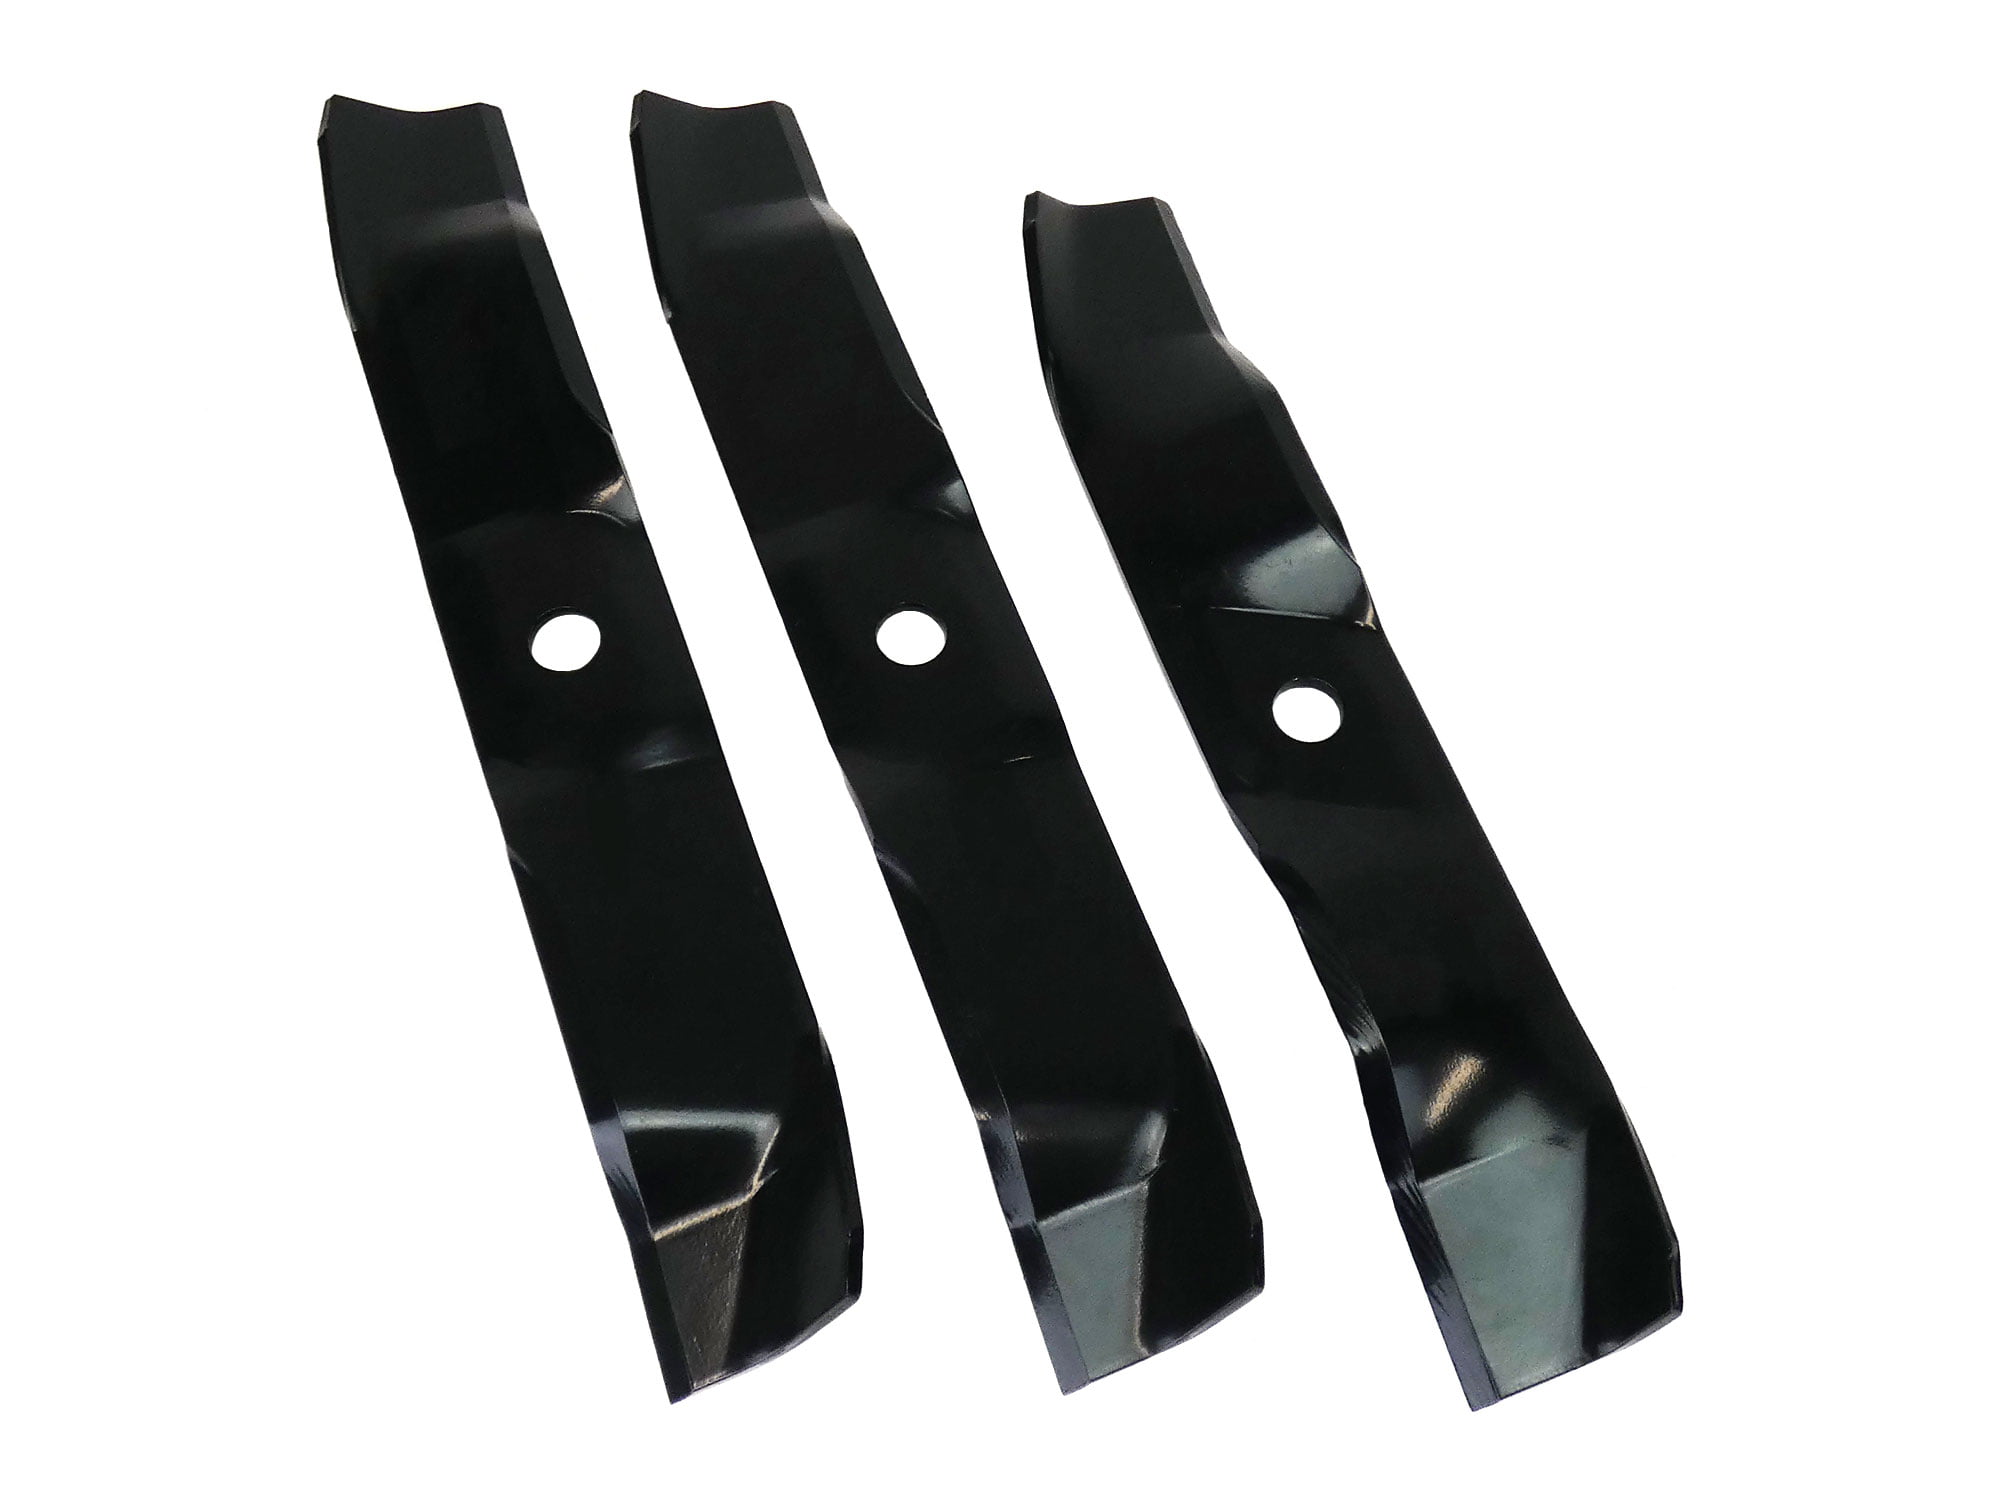 Details about   3 High Lift Blades For 46 Inch MTD Troy Bilt Ranch King Cub Cadet LT1045 Tractor 